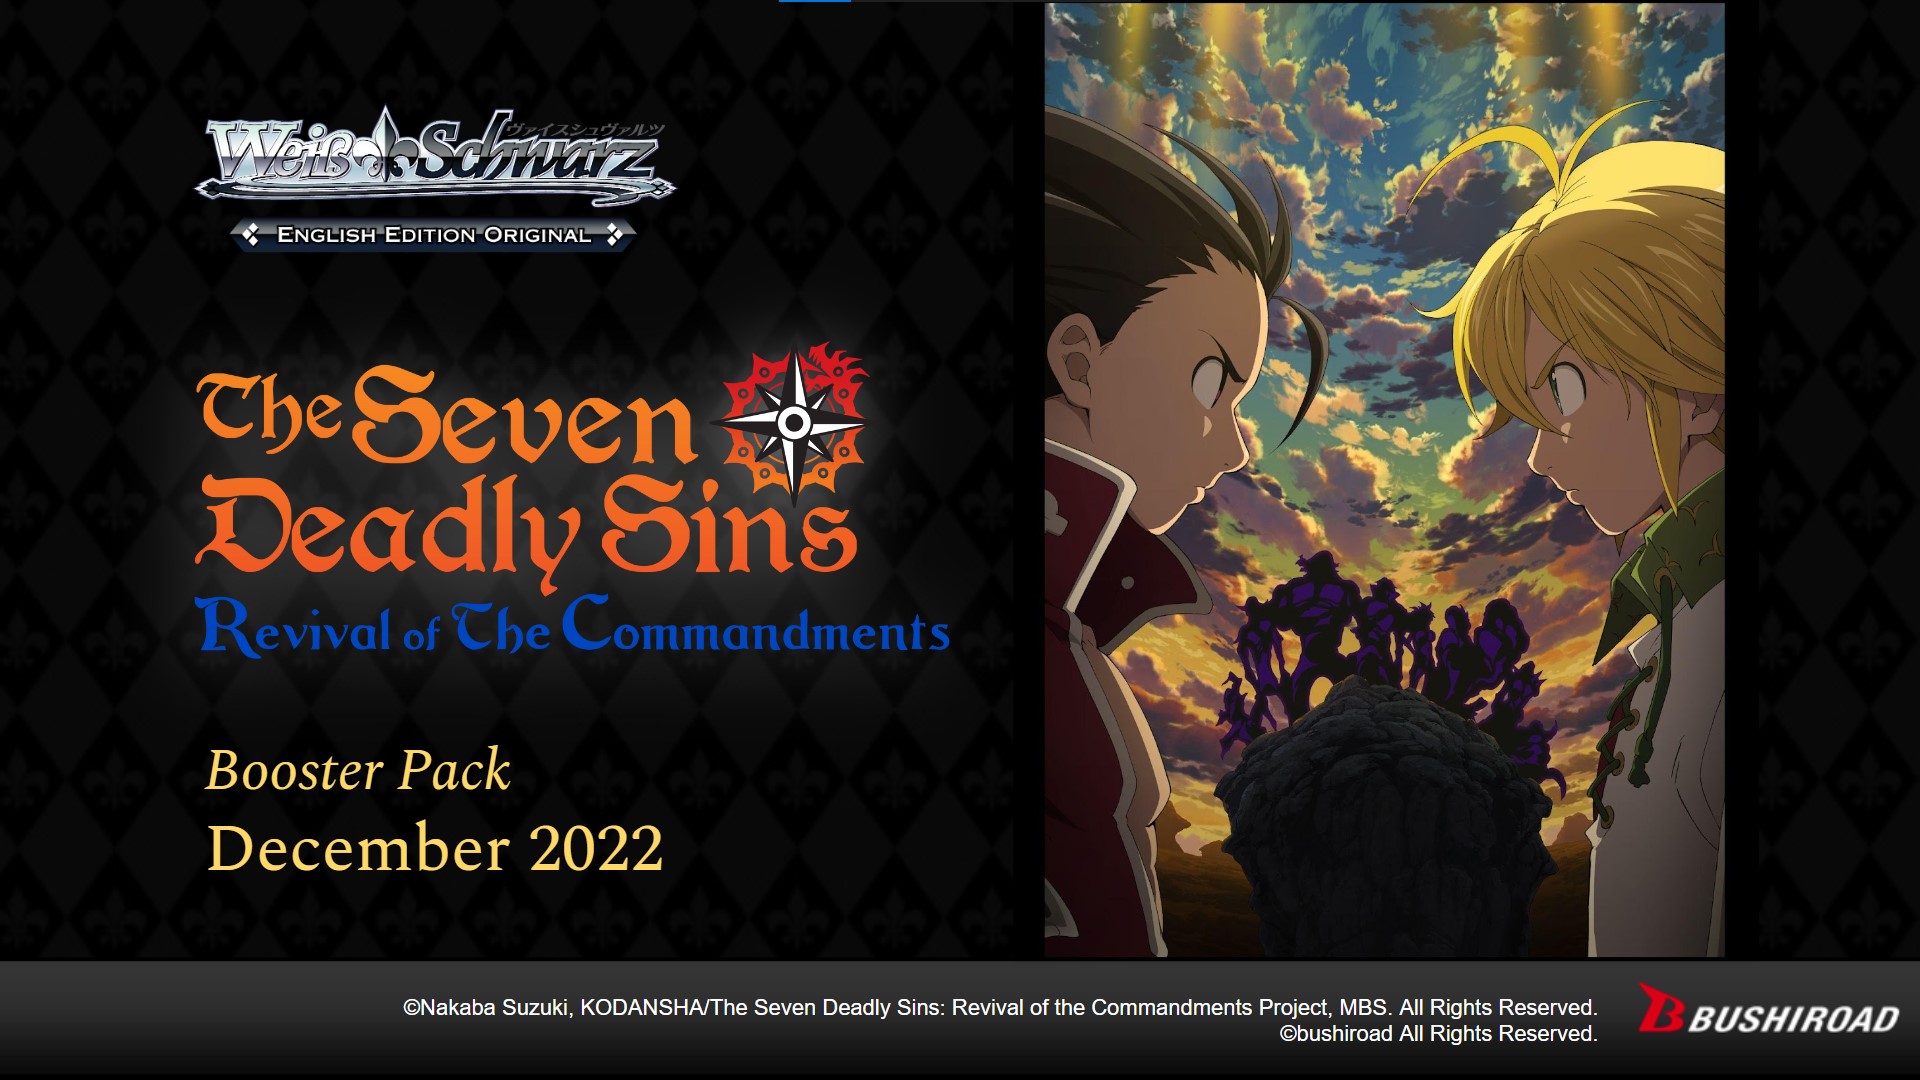 The Seven Deadly Sins: Revival of The Commandments